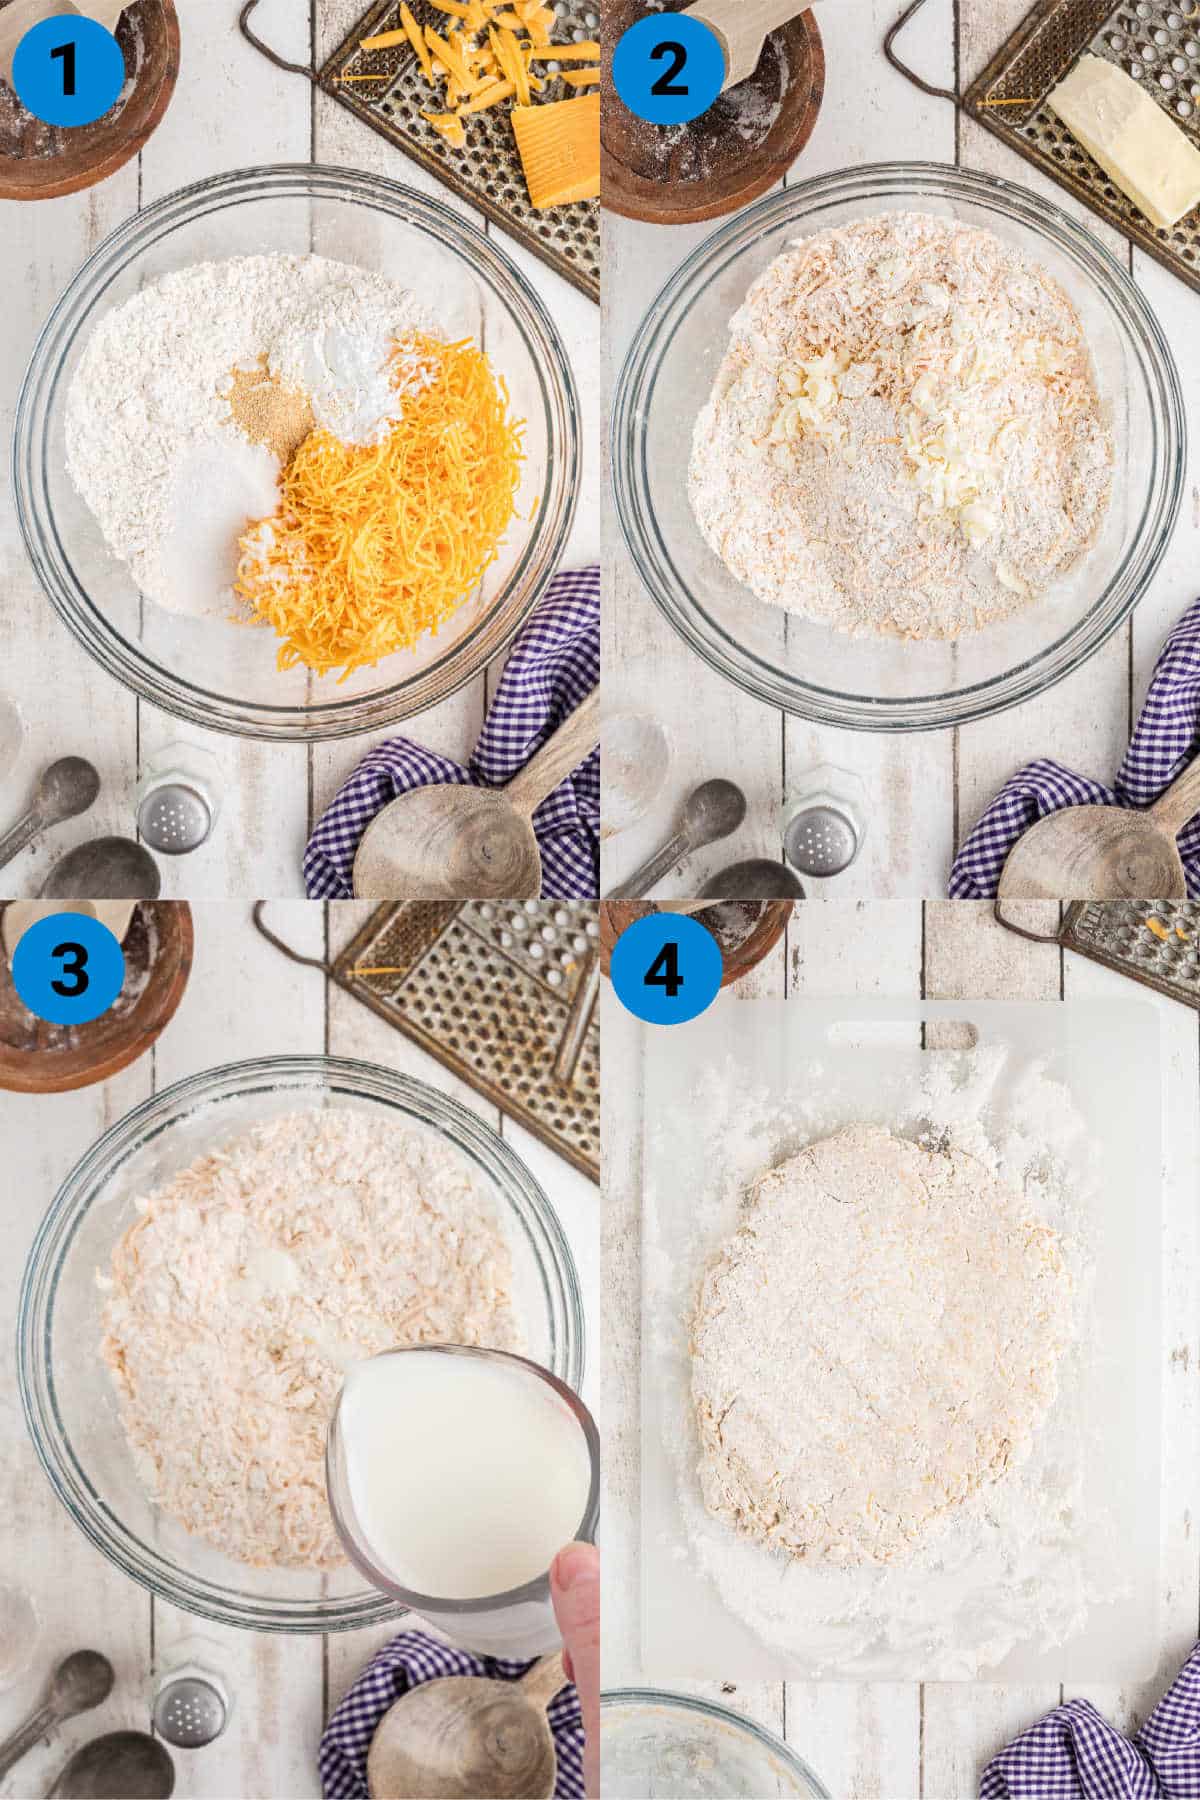 A collage of four images showing how to make cheesy biscuits, recipe steps 1 through 4.